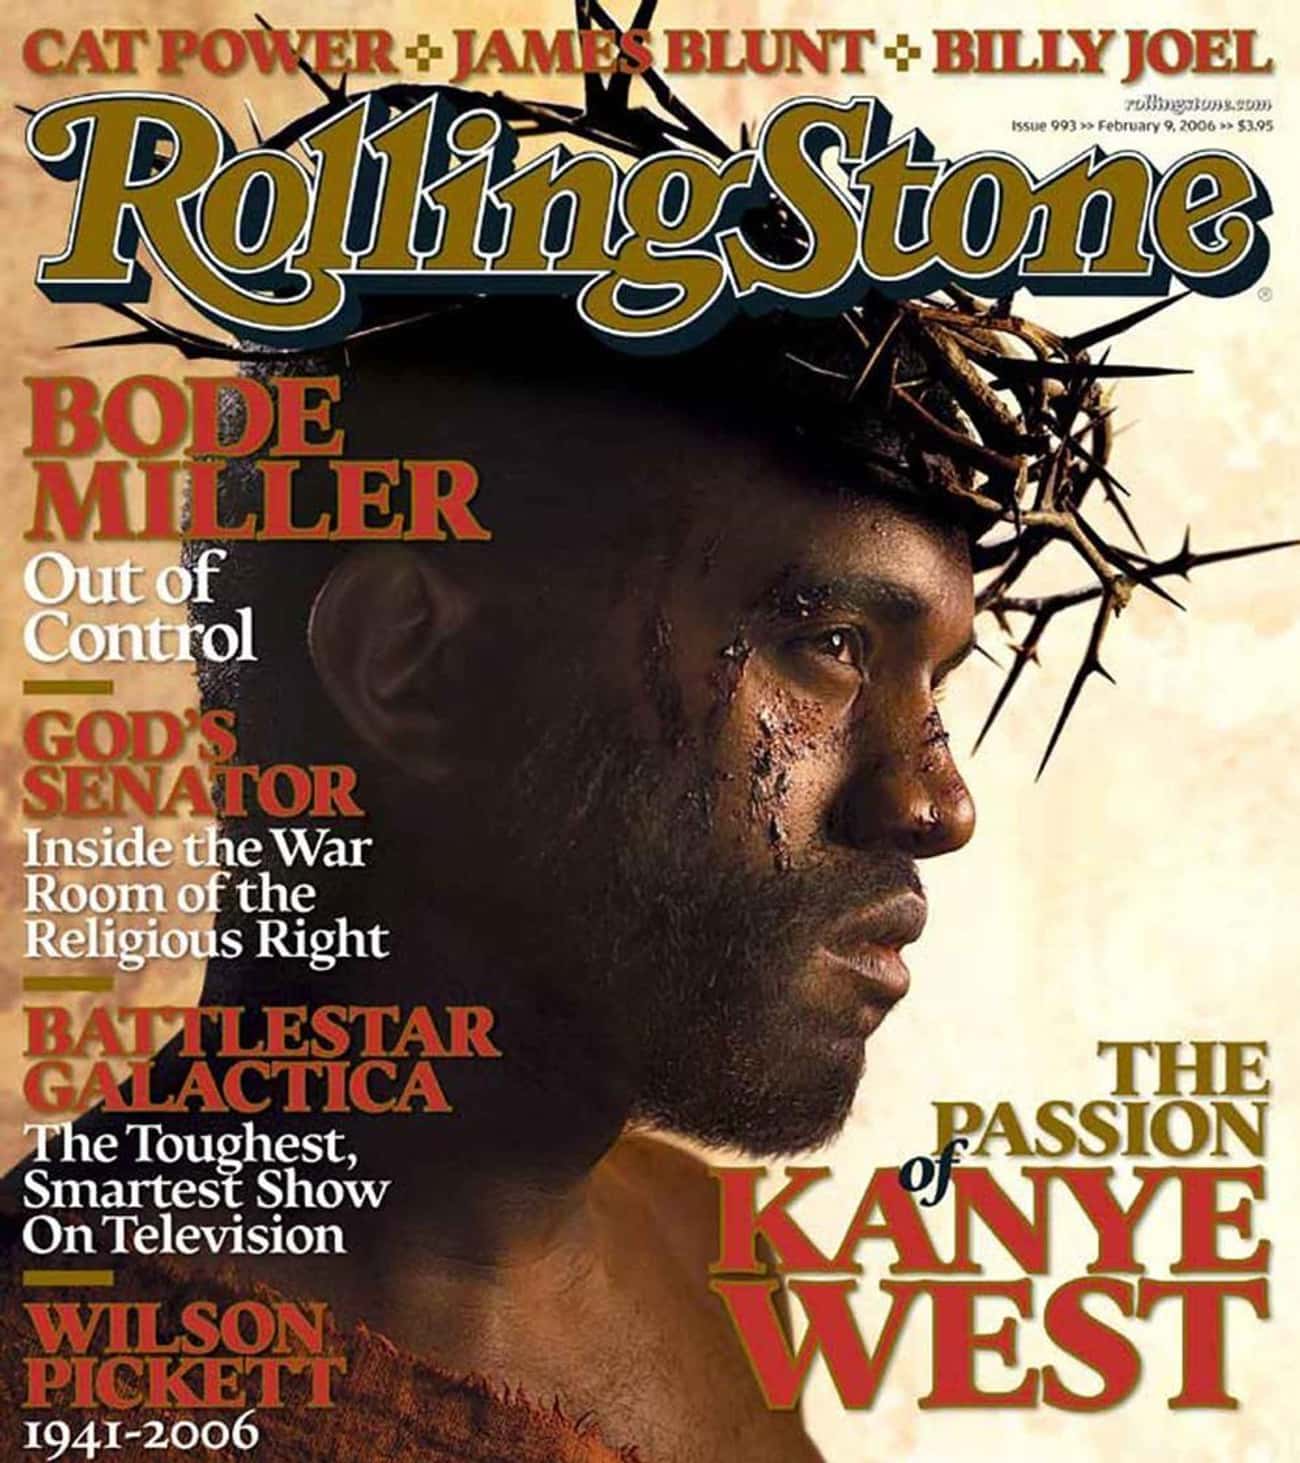 The Passion Of Kanye West — Rolling Stone, February 2006